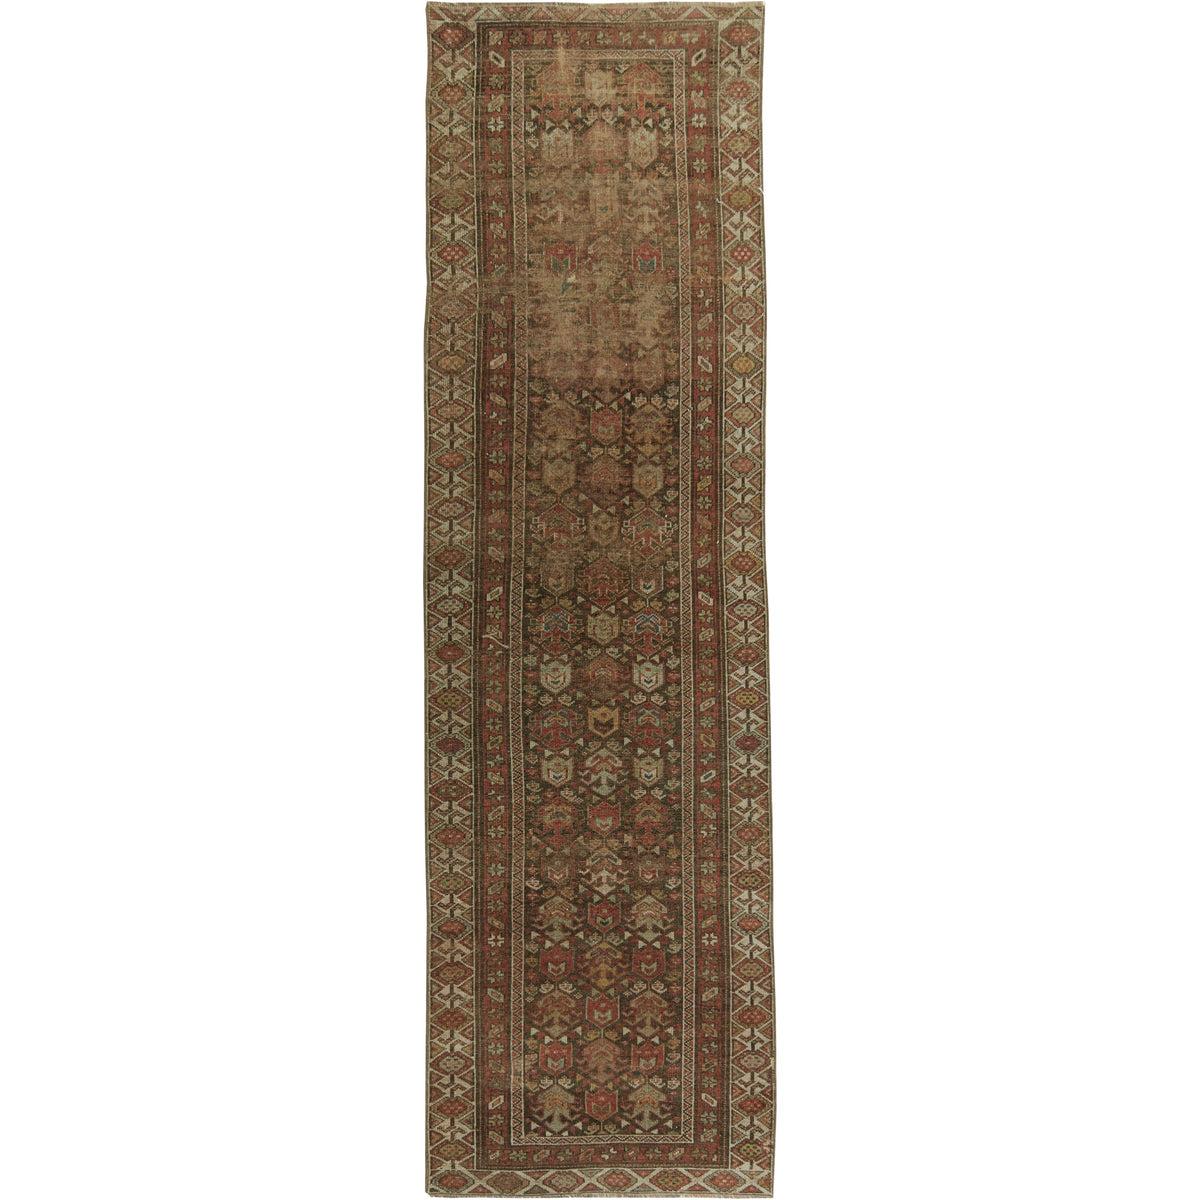 Rosa - The Brown Essence of Persian Weaves | Kuden Rugs